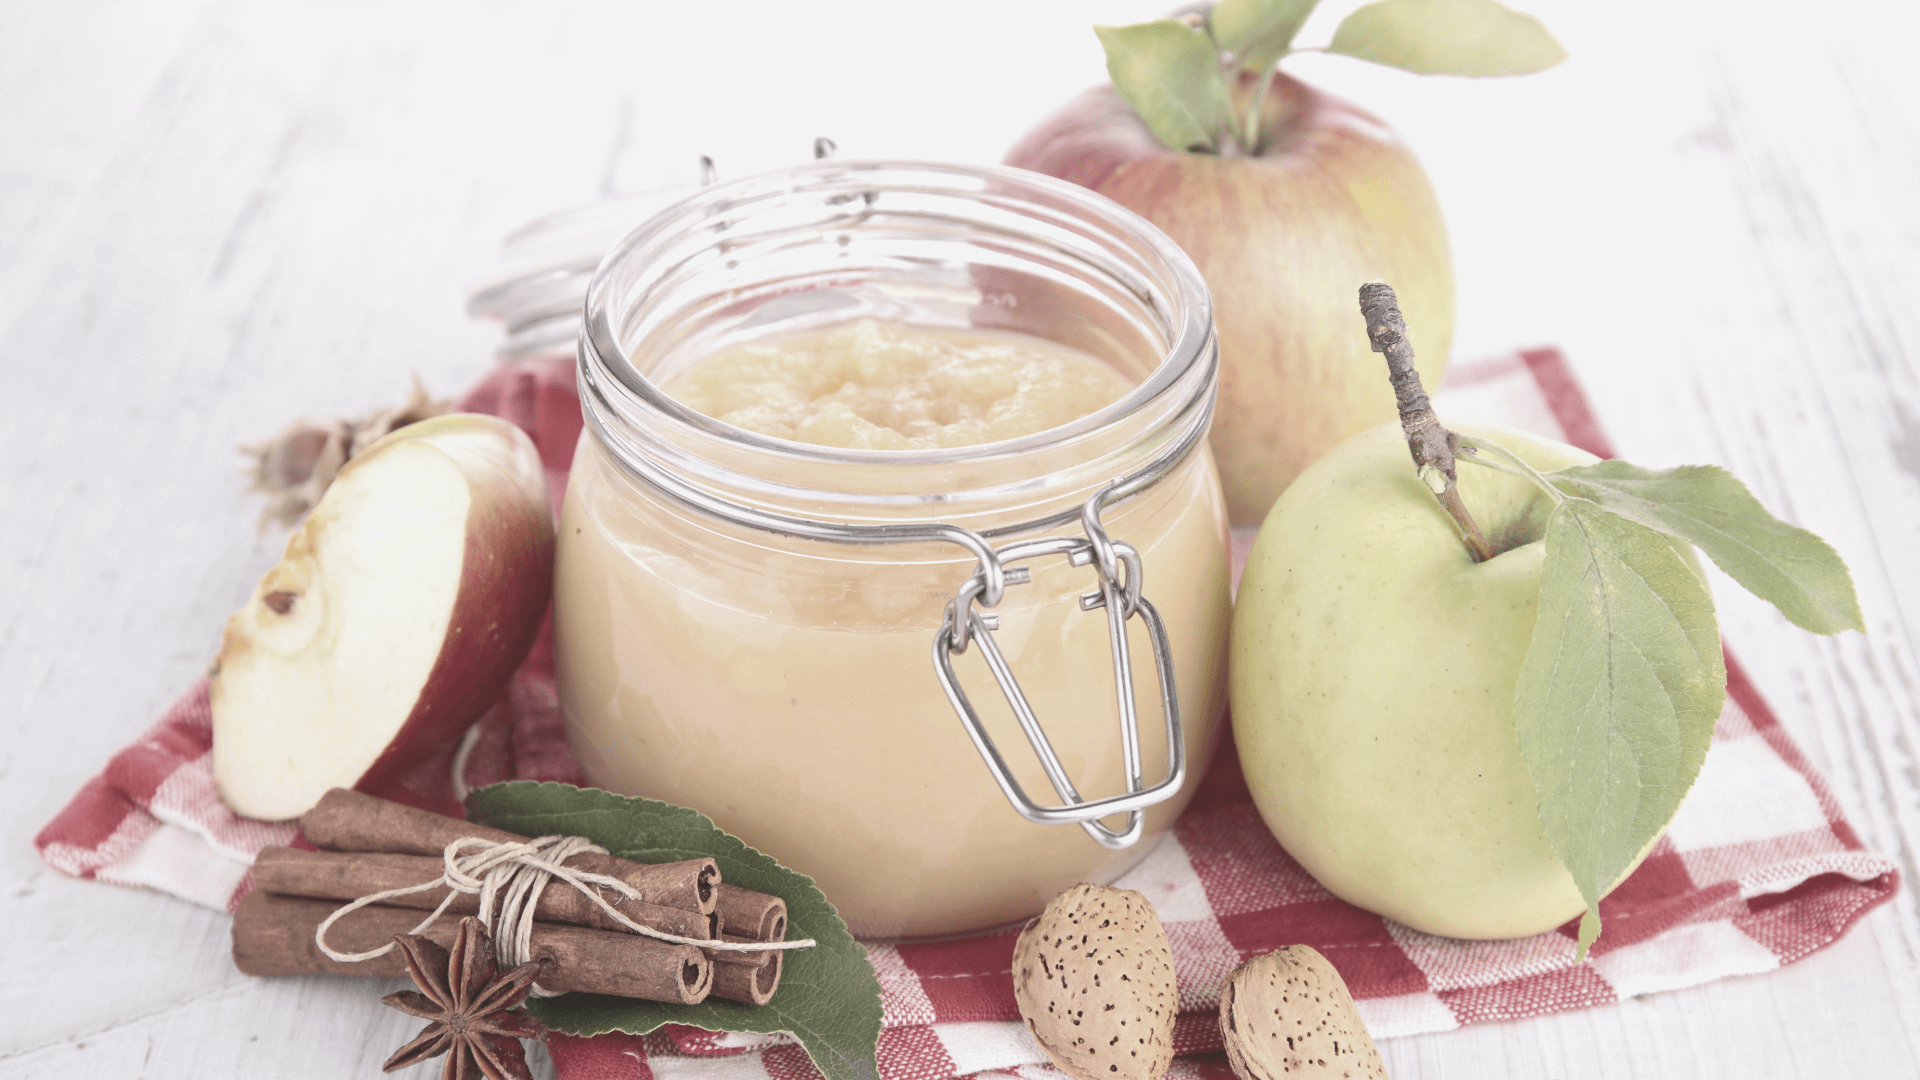 How to Make Slow Cooked Applesauce